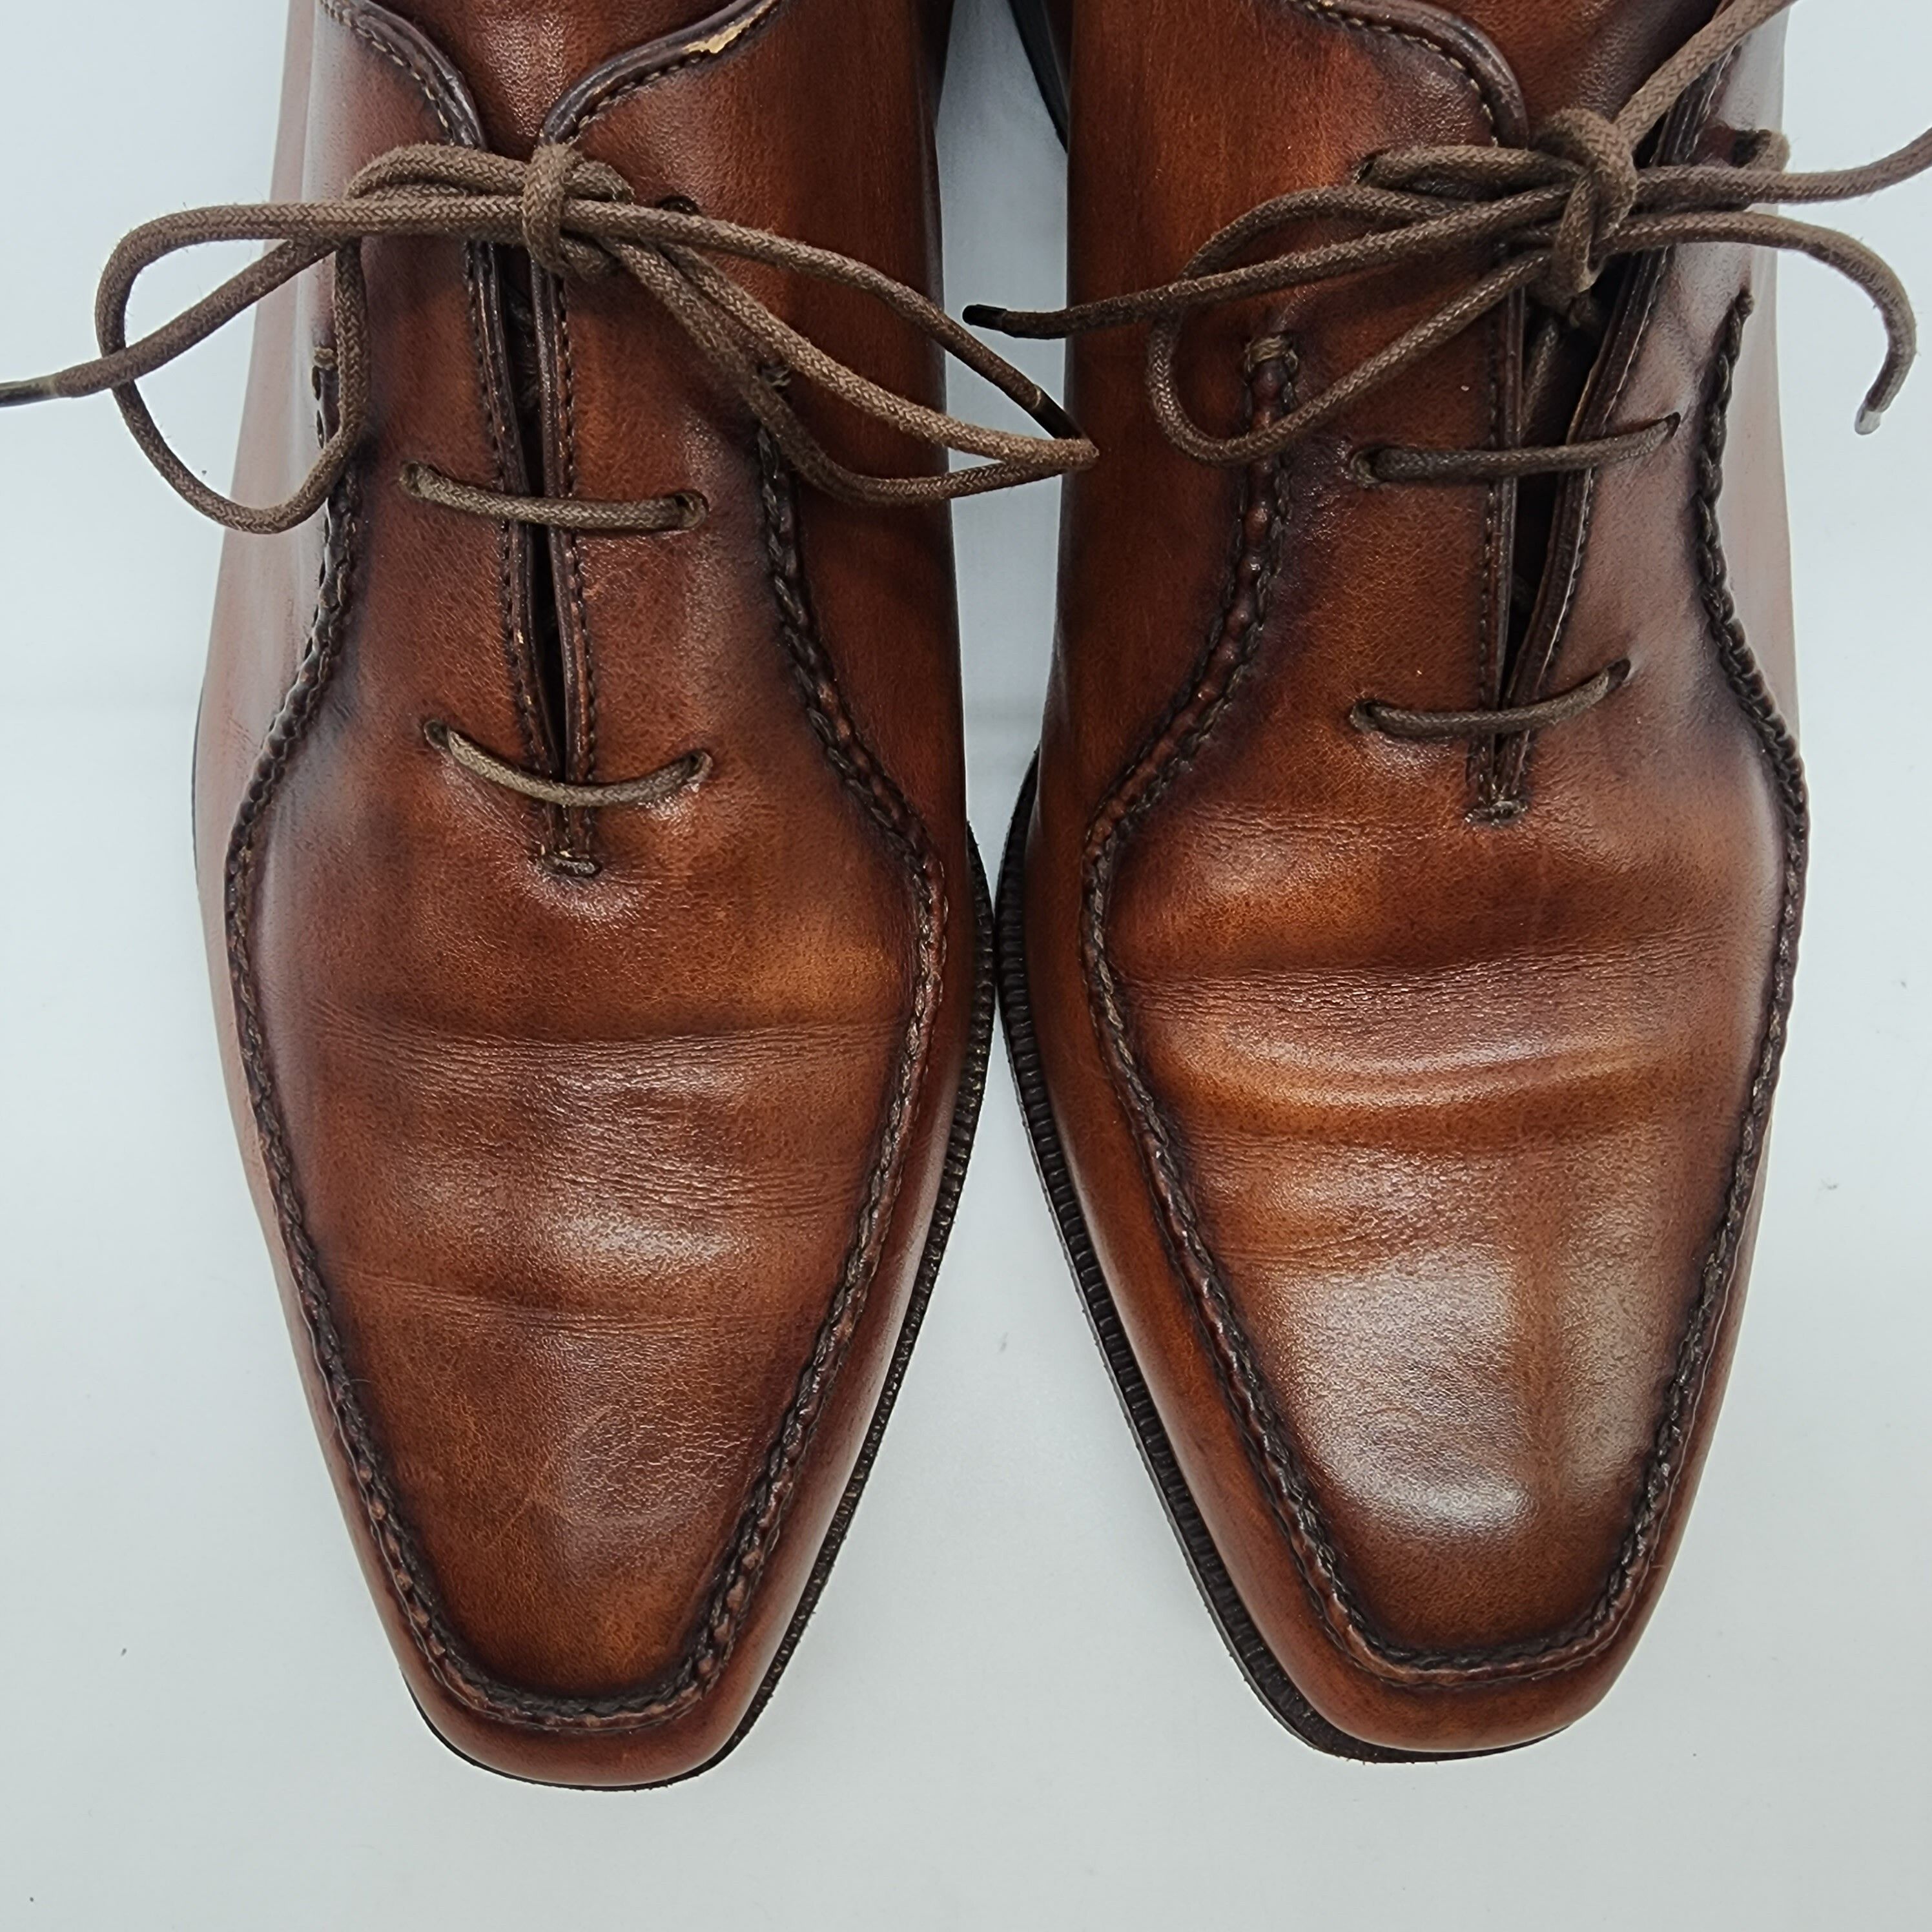 Berluti - Stitched Detail Leather Oxford Shoes - 4